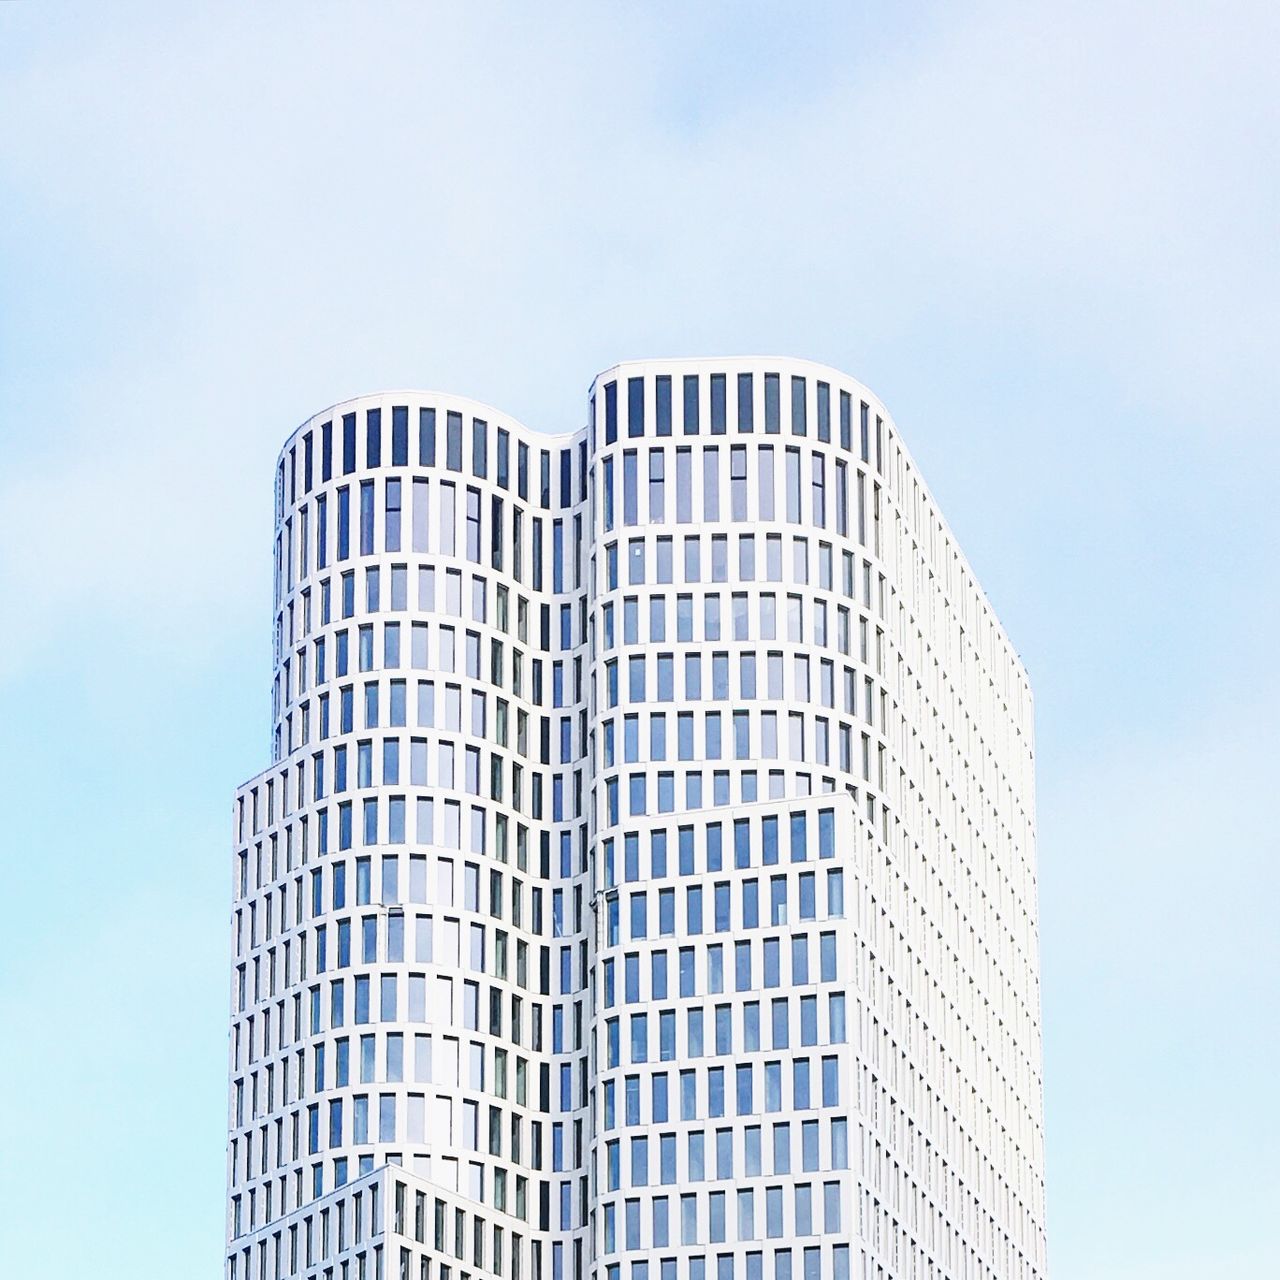 low angle view, architecture, building exterior, skyscraper, city, built structure, sky, modern, outdoors, day, tower, no people, tall, building story, office block